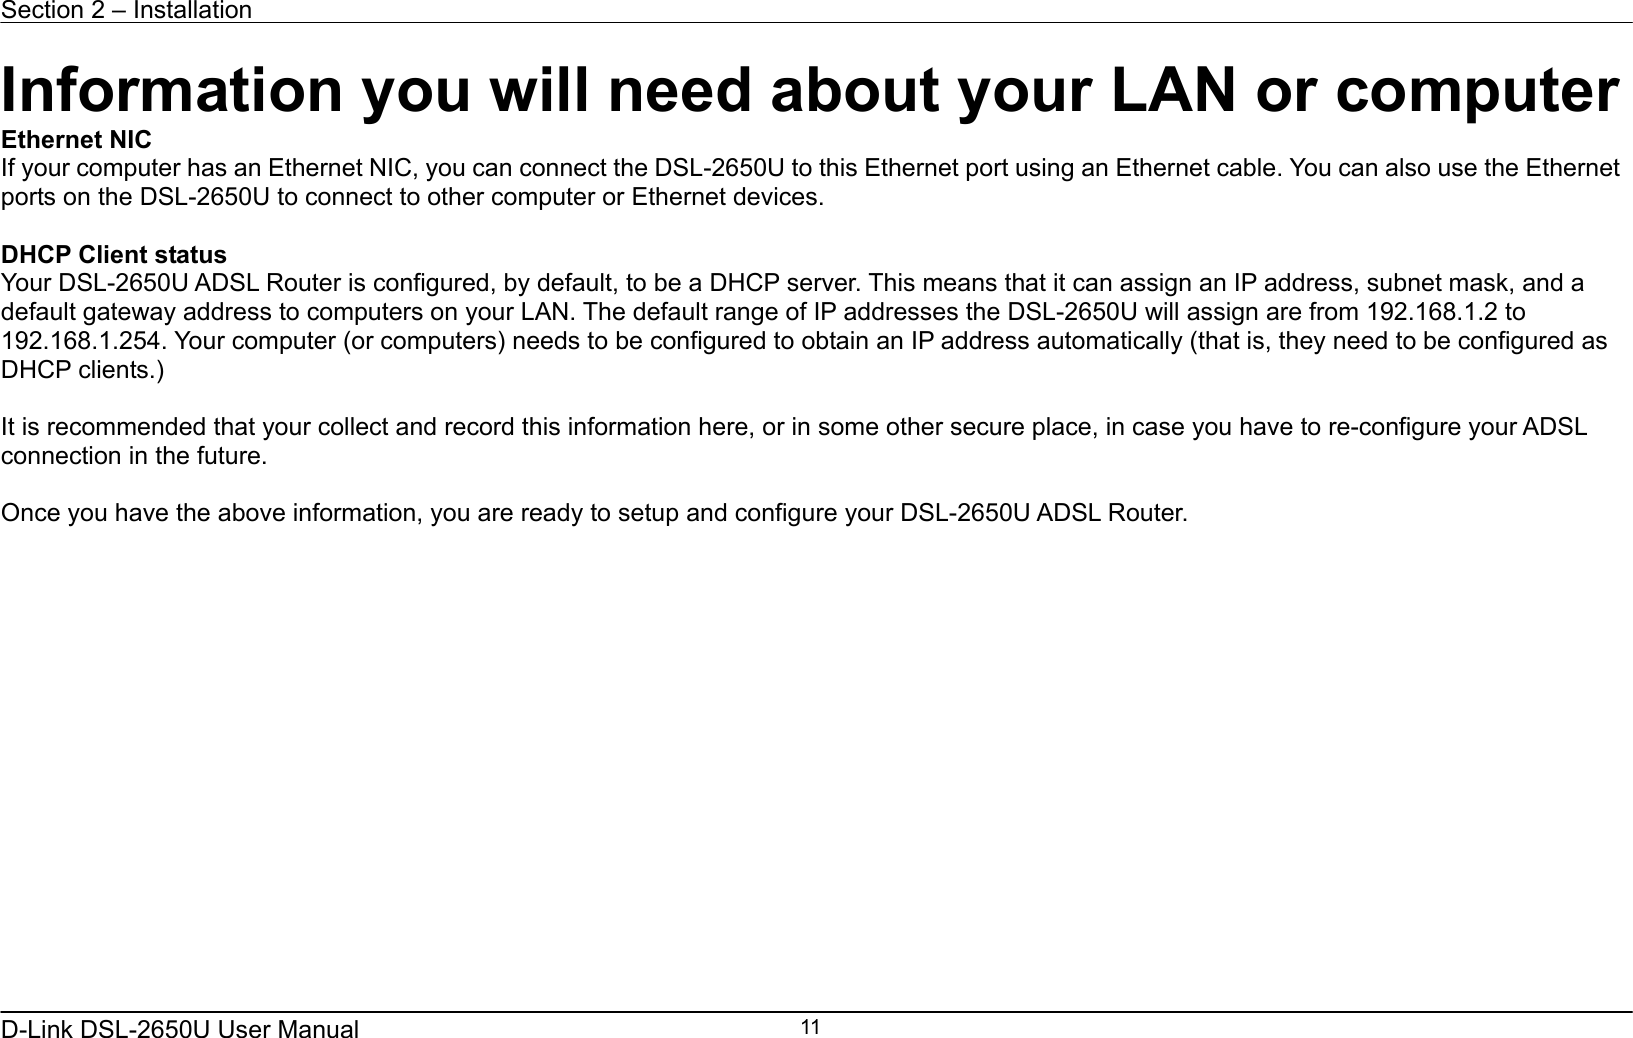 Section 2 – Installation   D-Link DSL-2650U User Manual    11Information you will need about your LAN or computer Ethernet NIC If your computer has an Ethernet NIC, you can connect the DSL-2650U to this Ethernet port using an Ethernet cable. You can also use the Ethernet ports on the DSL-2650U to connect to other computer or Ethernet devices.  DHCP Client status Your DSL-2650U ADSL Router is configured, by default, to be a DHCP server. This means that it can assign an IP address, subnet mask, and a default gateway address to computers on your LAN. The default range of IP addresses the DSL-2650U will assign are from 192.168.1.2 to 192.168.1.254. Your computer (or computers) needs to be configured to obtain an IP address automatically (that is, they need to be configured as DHCP clients.)    It is recommended that your collect and record this information here, or in some other secure place, in case you have to re-configure your ADSL connection in the future.  Once you have the above information, you are ready to setup and configure your DSL-2650U ADSL Router. 